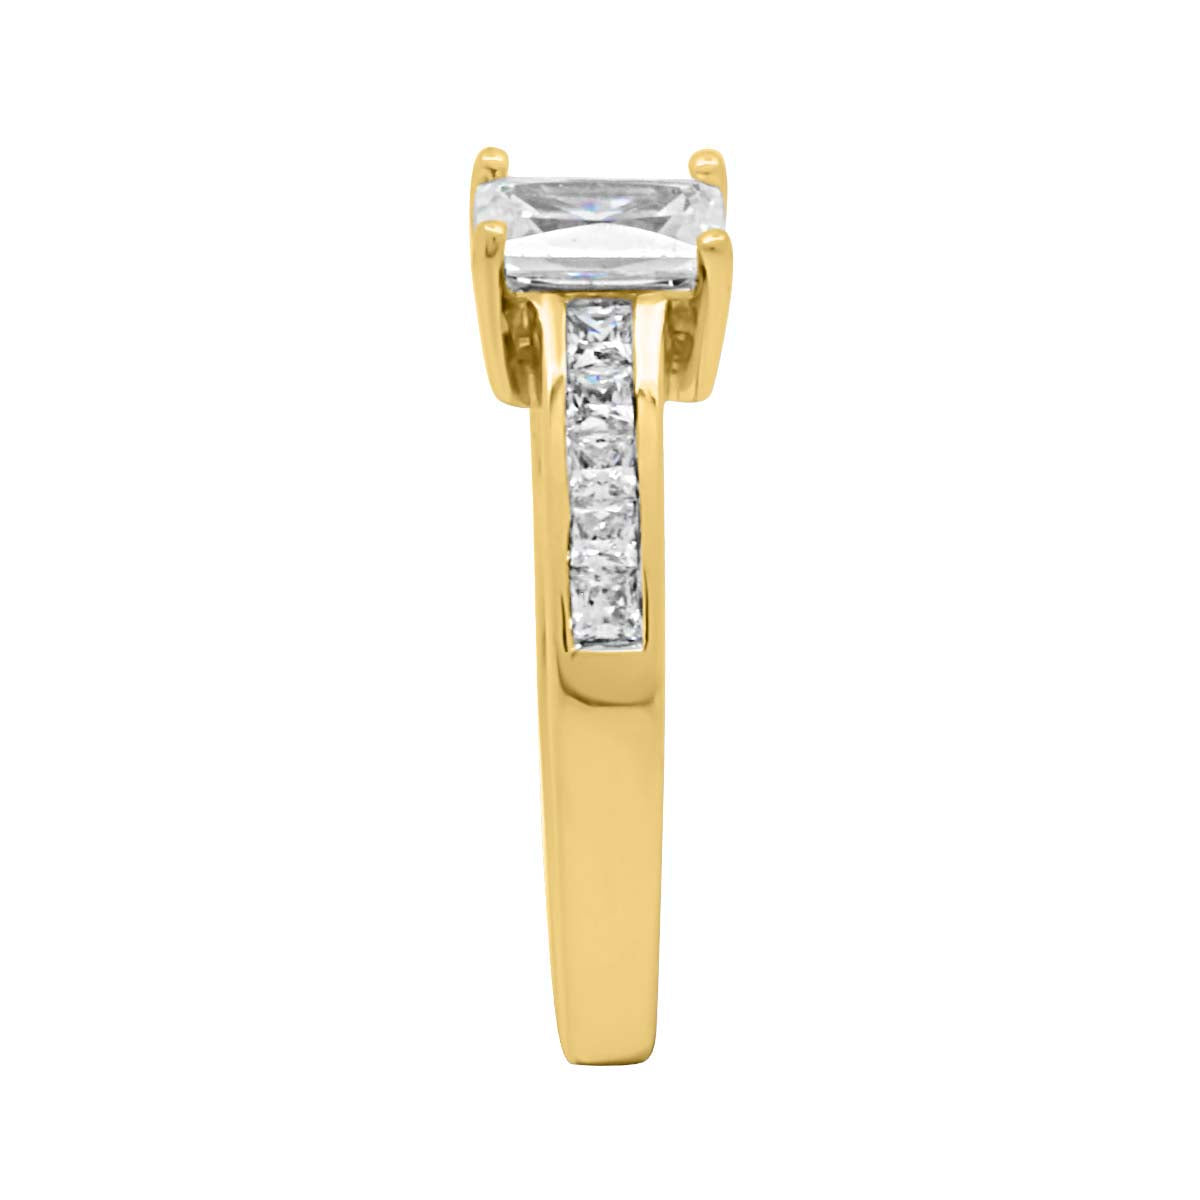 Radiant Cut Engagement Ring in yellow gold standing to an side view